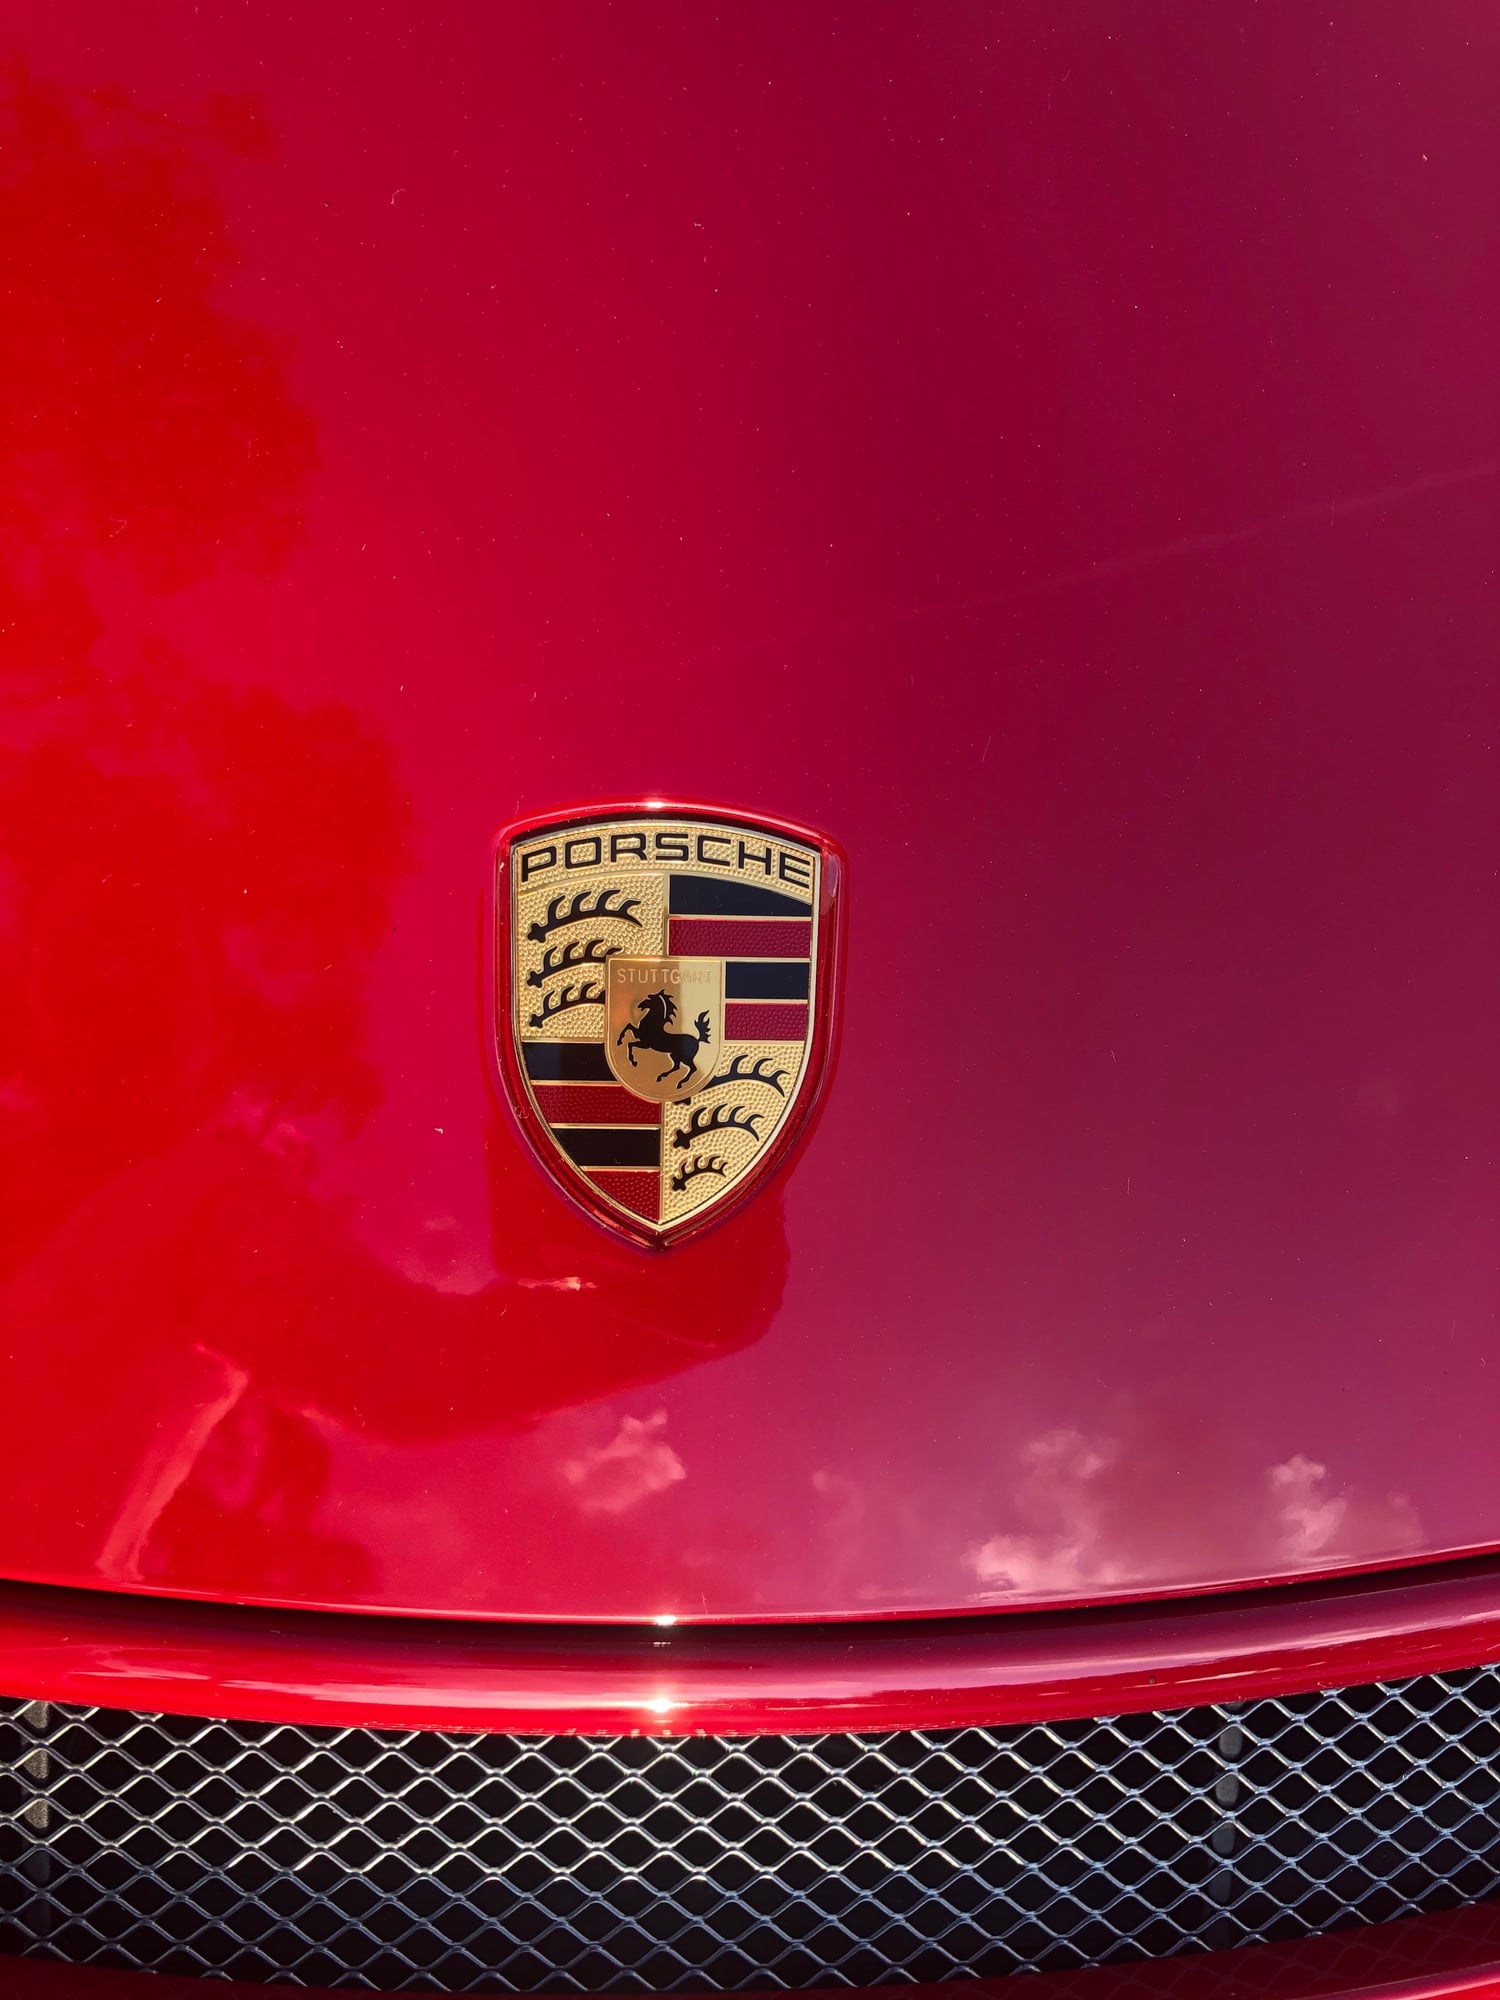 2018 Porsche GT3 - 2018 GT3 Touring, Premium Carmine Red, 1375 Miles, CPO Through 11/2024 - Used - VIN WP0AC2A93JS176809 - 2WD - Manual - Coupe - Red - Orlando, FL 34786, United States